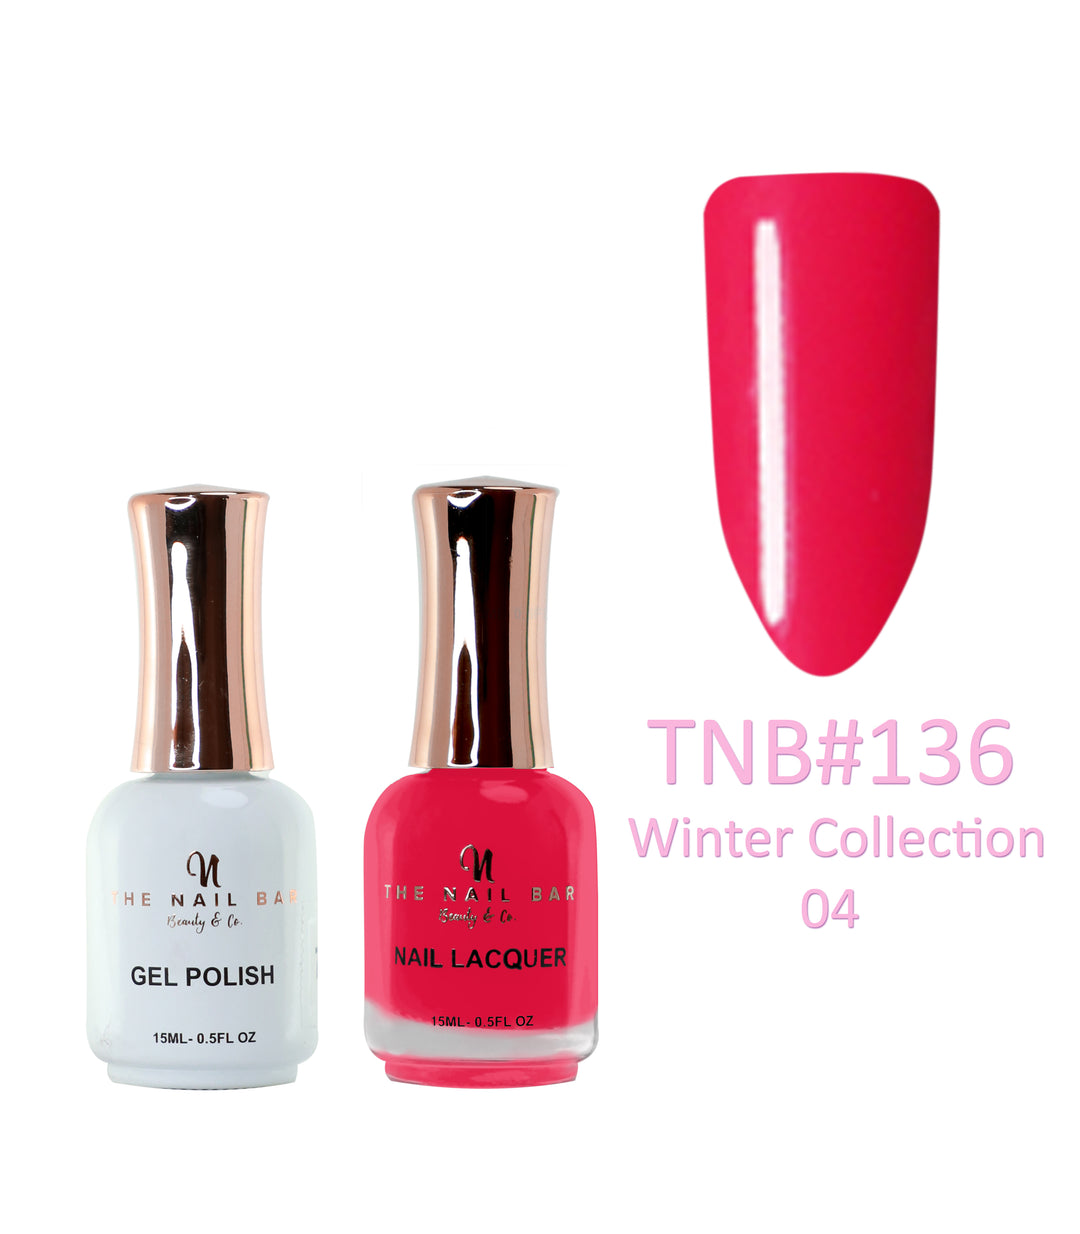 Dual Polish/Gel colour matching (15ml) - Winter collection 04